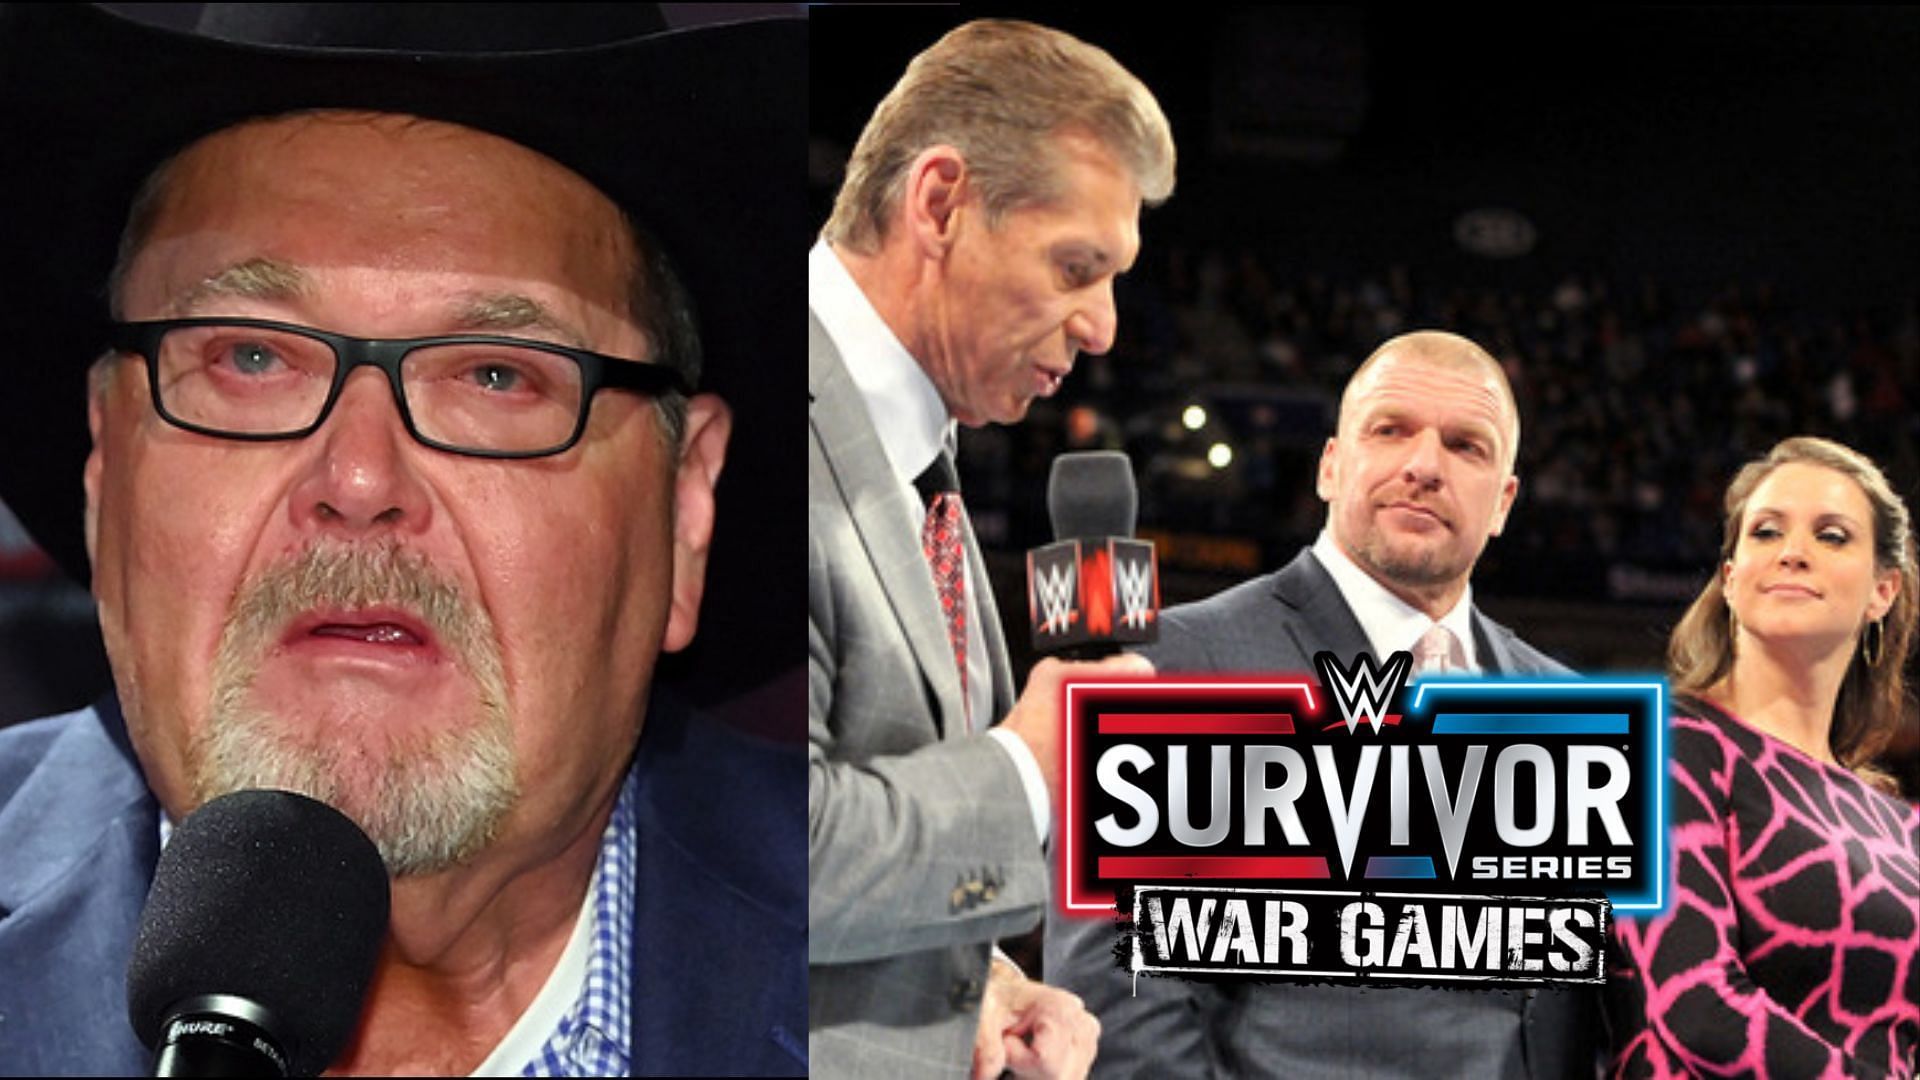 From left to right: Jim Ross, Vince McMahon, Paul &quot;Triple H&quot; Levesque and Stephanie McMahon